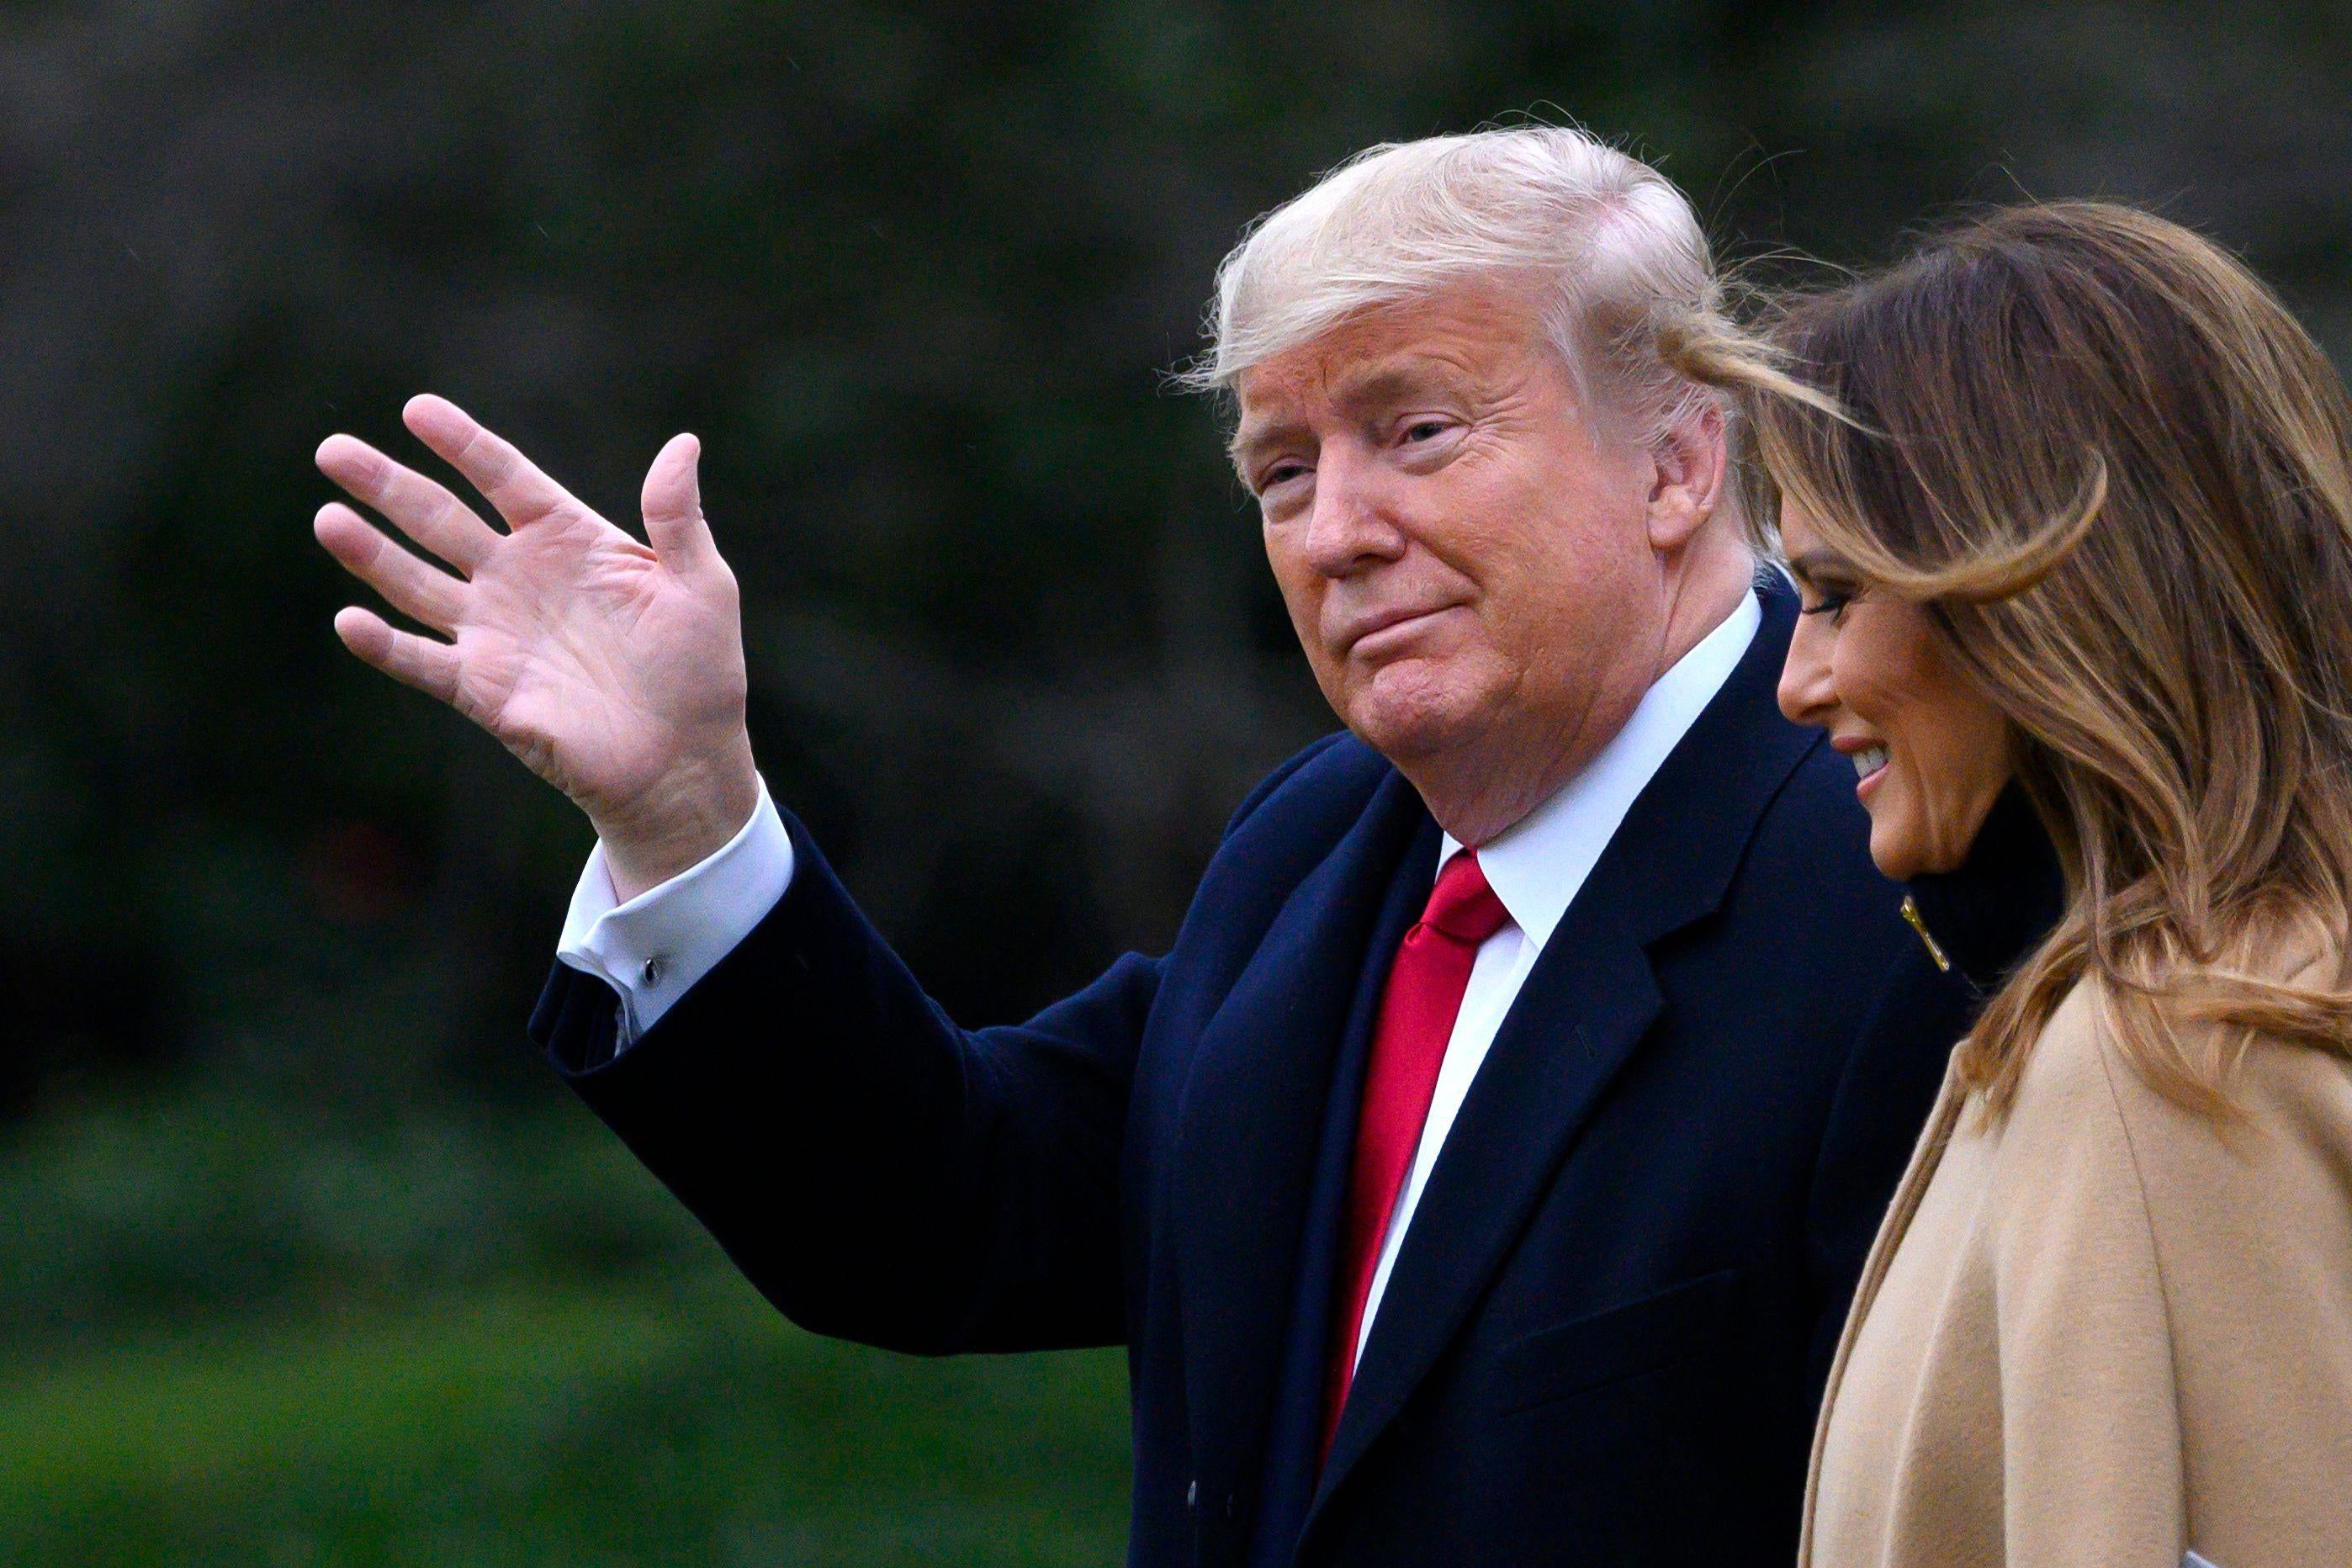 President Donald Trump waves as he and First Lady Melania Trump walk to Marine One before departing from the South Lawn of the White House in Washington, D.C. on January 31, 2020. 